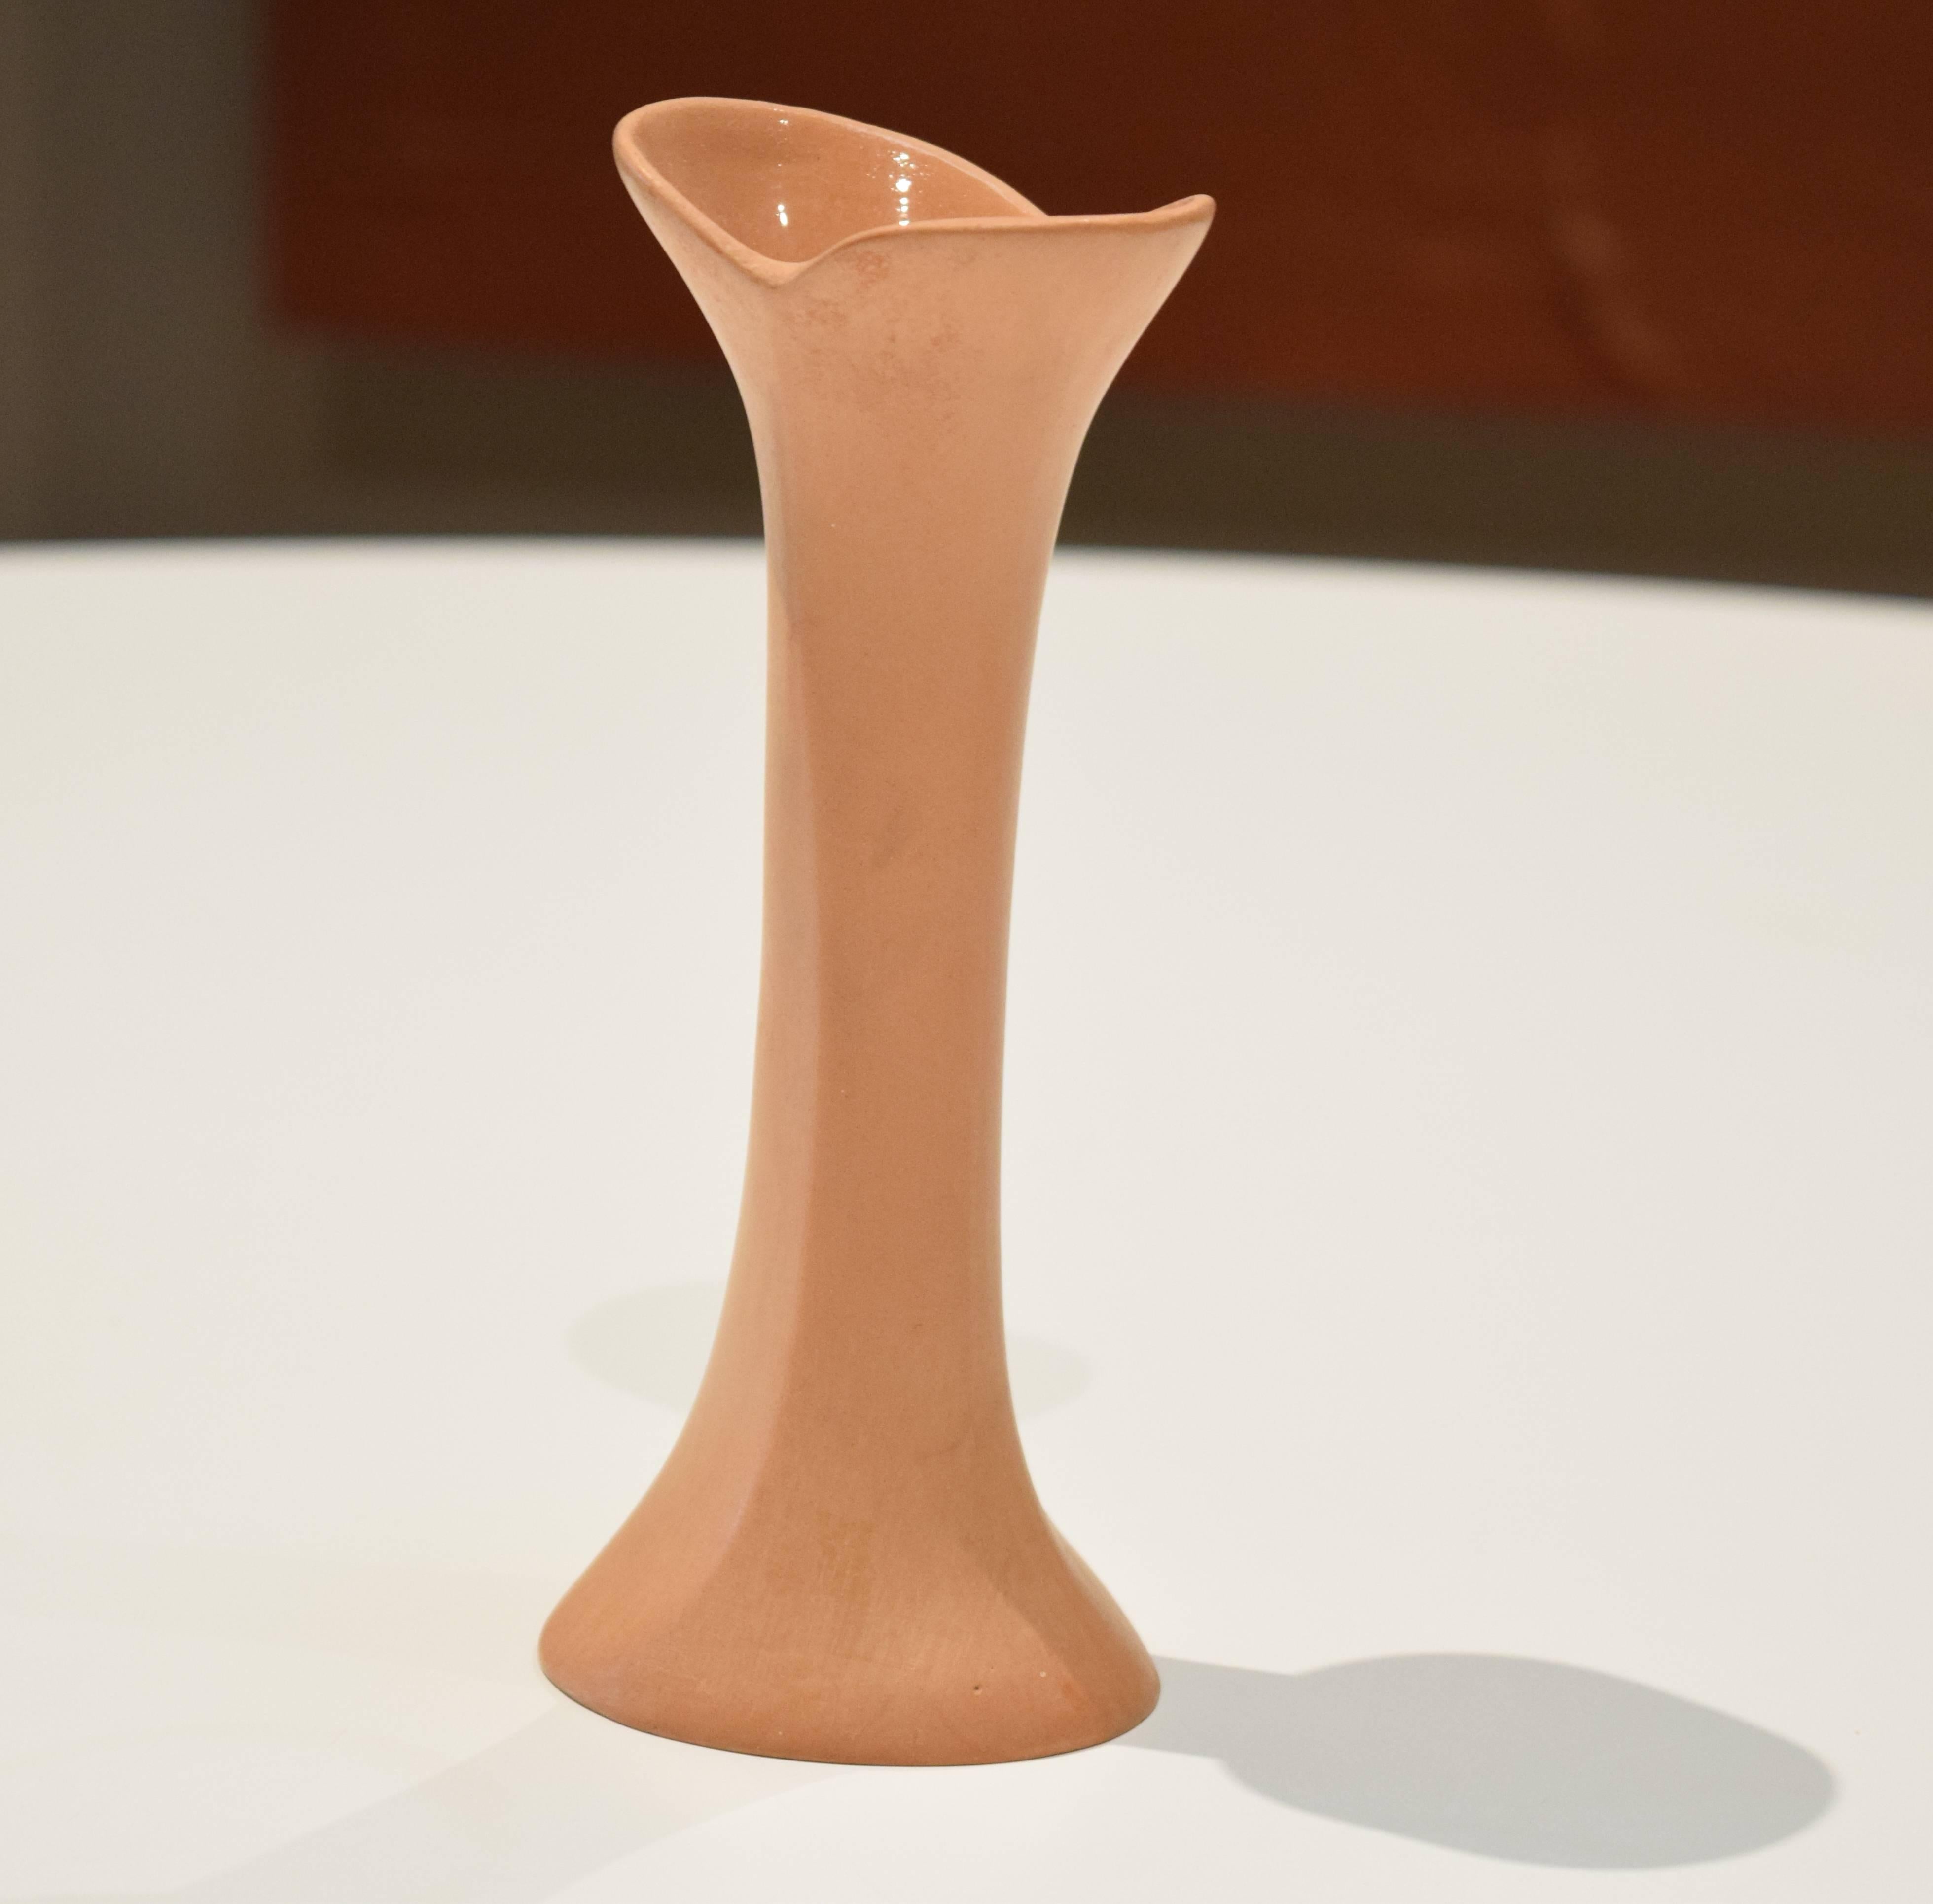 Store closing-- last day is 7/31. Offers welcome! Slender terracotta vase with glazed interior and matte exterior. By Elsa Peretti for Tiffany & Co.